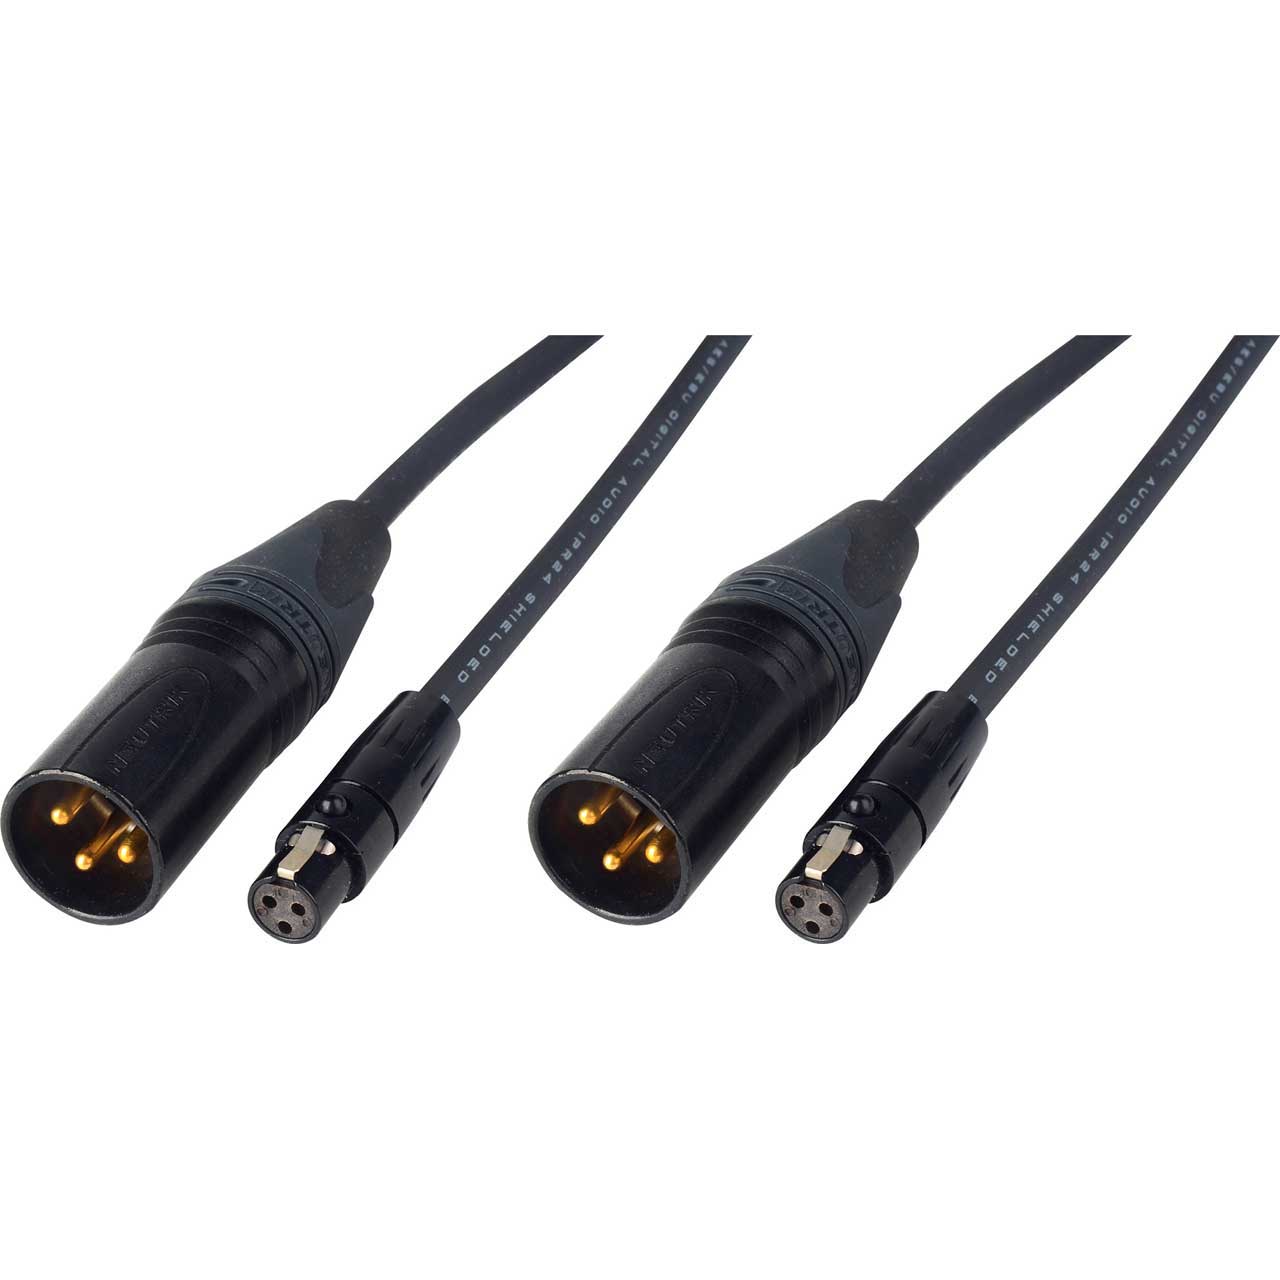 Laird SD-AUD2-03 Sound Devices Audio Cable TA3F to Standard 3-Pin XLR Male Cable - 3 Foot Pair